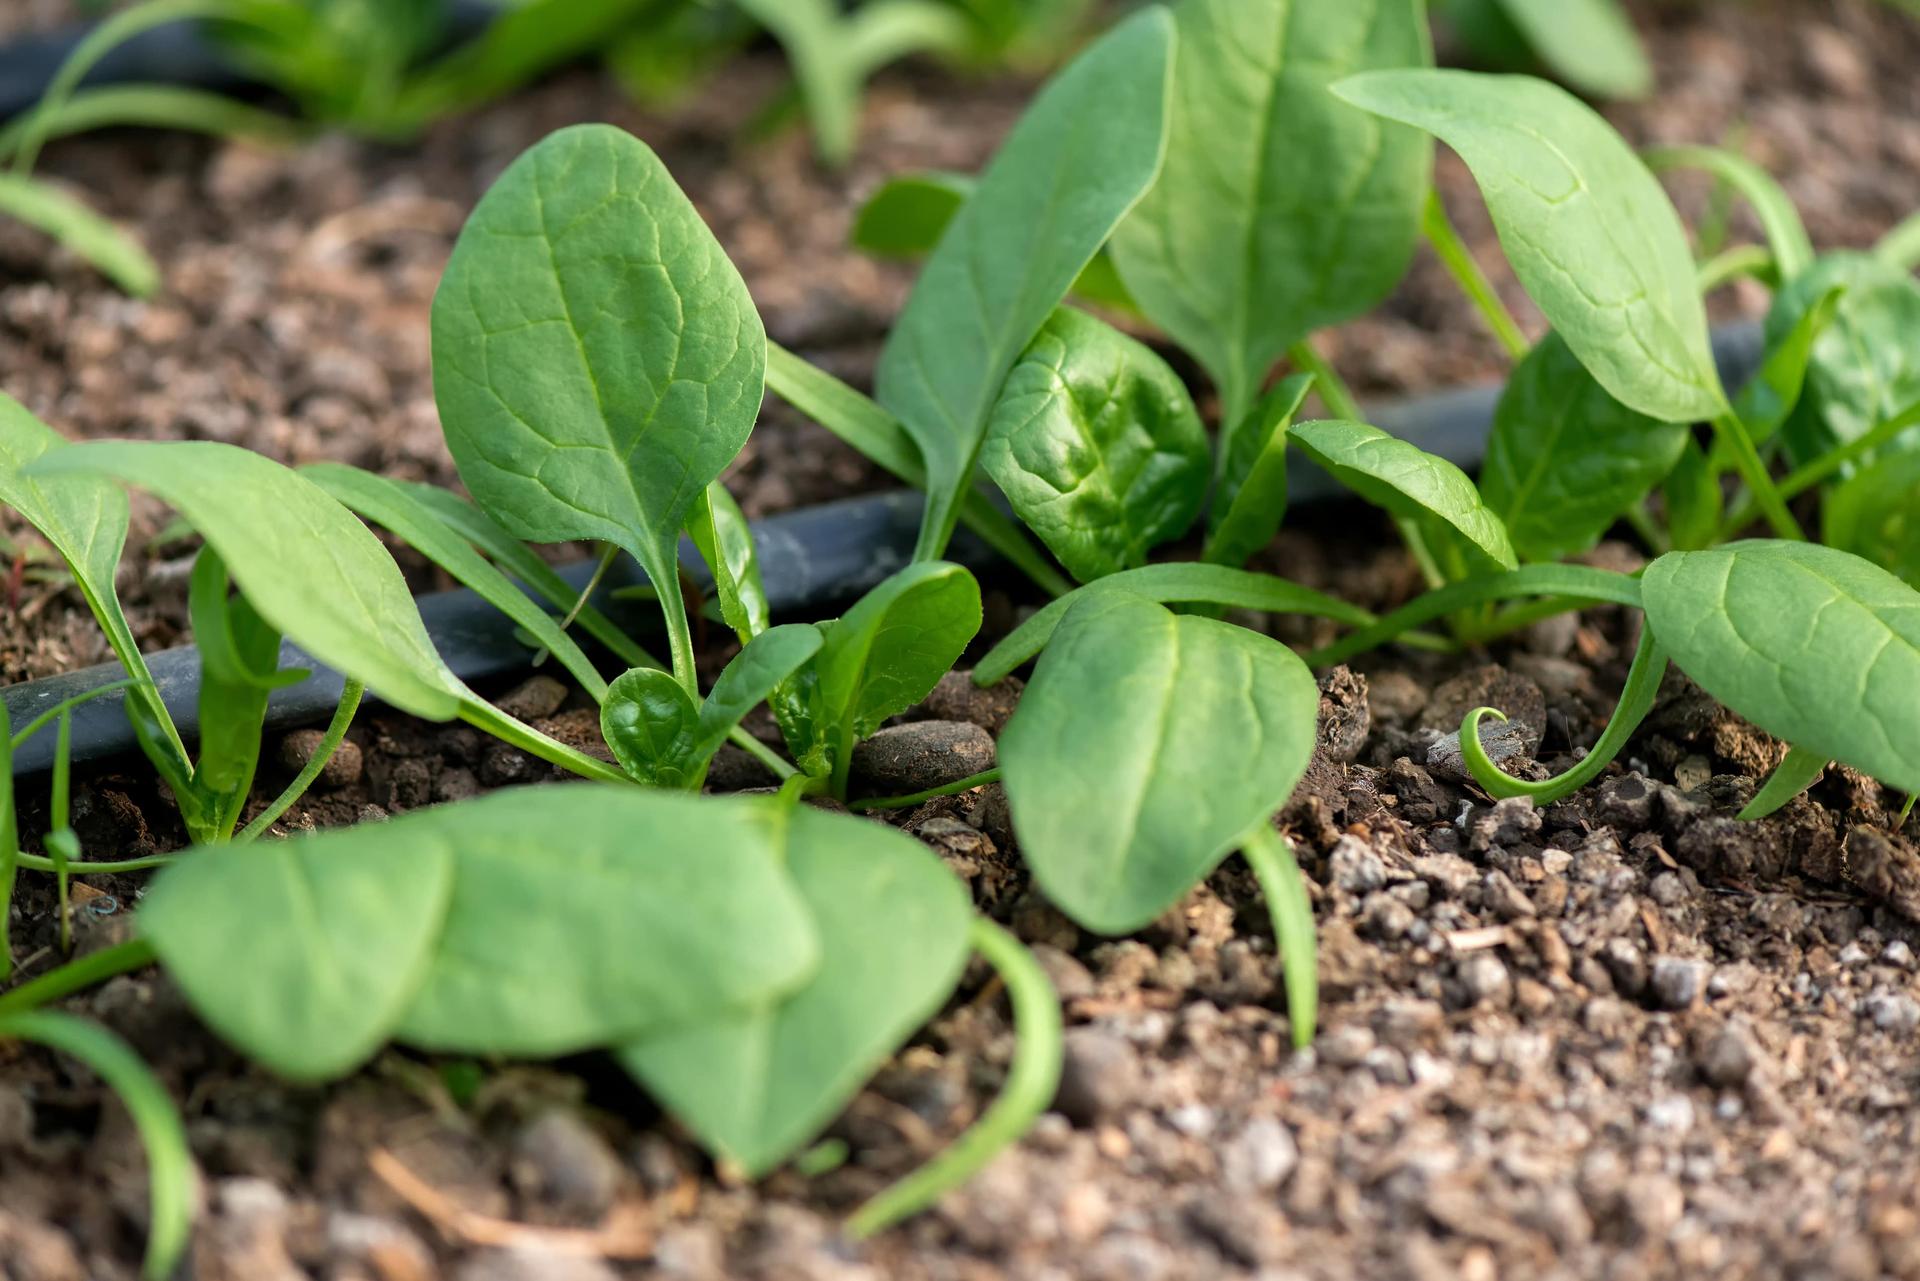 Spinach growing in the garden